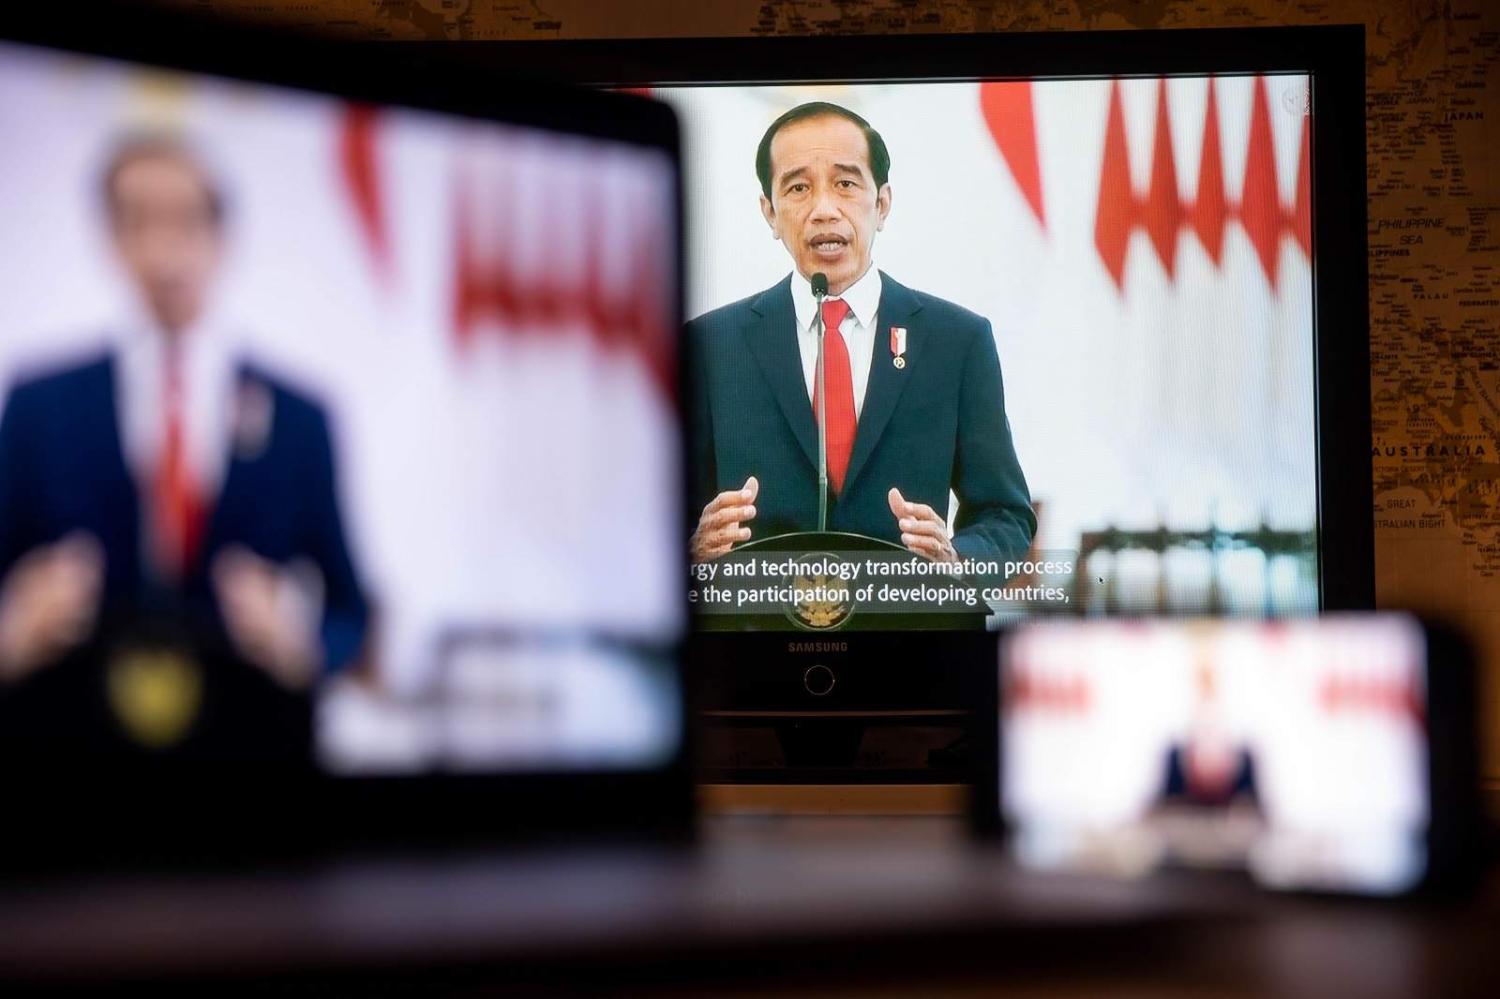 Indonesian President Joko Widodo speaks at the UN General Assembly meeting via live stream in New York, 22 September 2021 (Michael Nagle/Bloomberg via Getty Images)